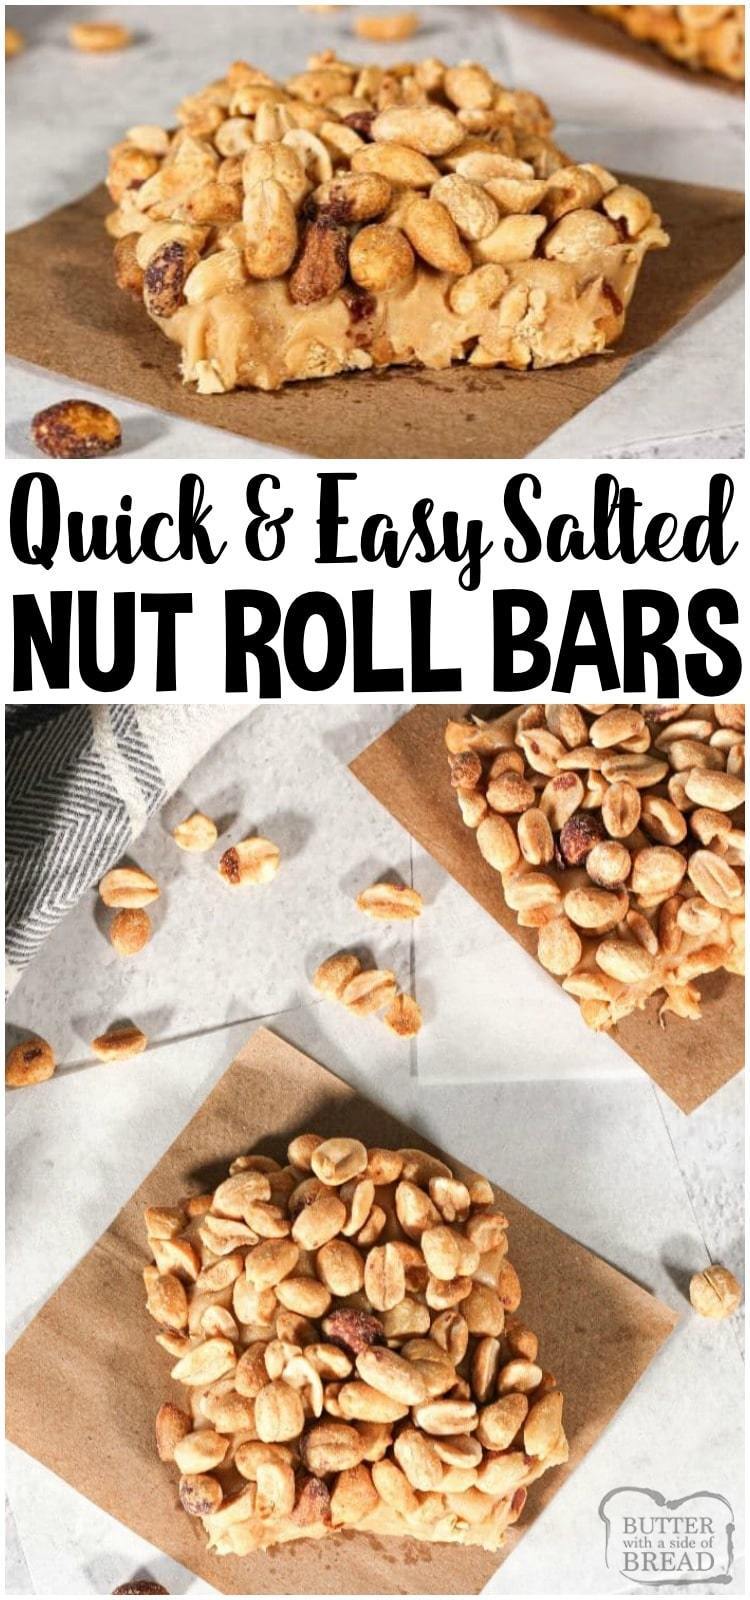 Salted Nut Roll Bars are just like the delicious candy bar we all know and love in a simple bar. This easy Salted Nut Roll Bar Recipe is layers of roasted peanuts and a creamy peanut butter center that is a tastebud treat with every bite! #peanuts #saltednuts #nutroll #dessert #recipe #candy from BUTTER WITH A SIDE OF BREAD